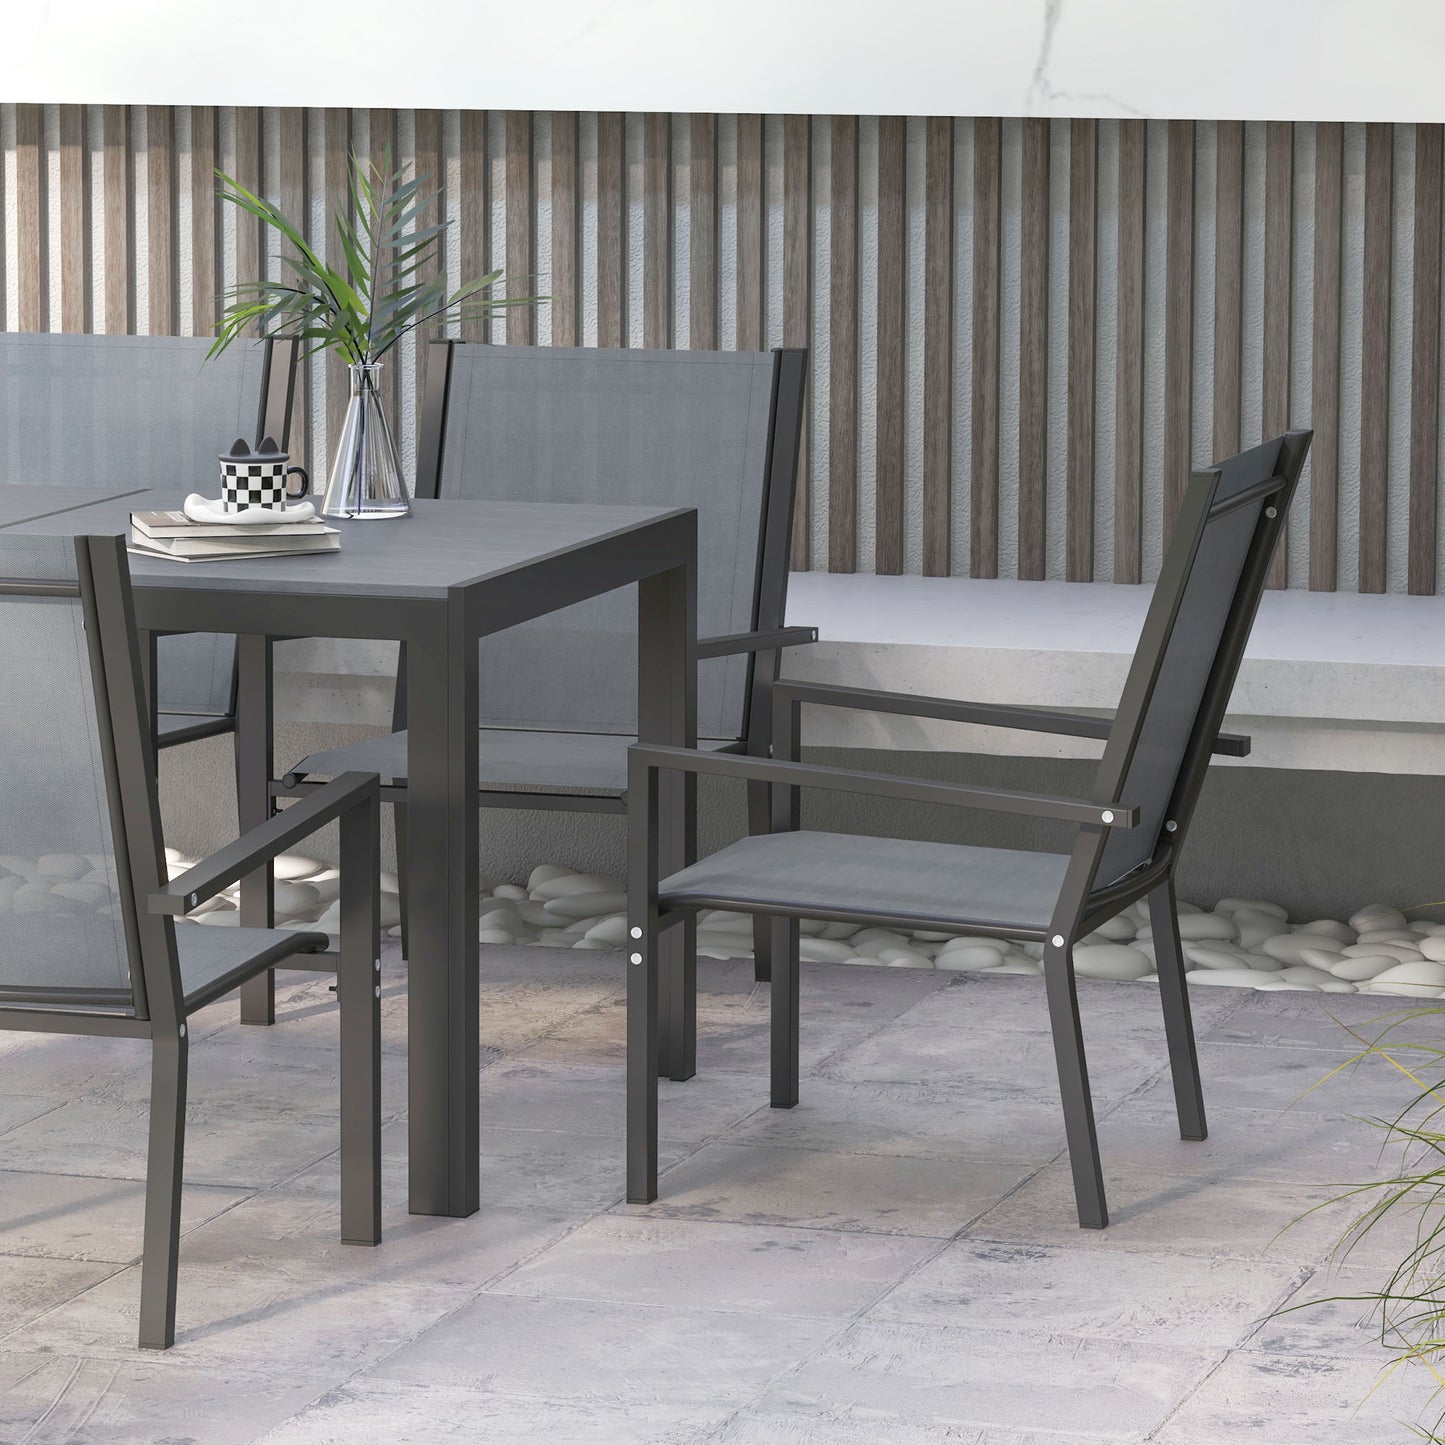 Outsunny 7 Pieces Garden Dining Set with Wood-plastic Composite Dining Table, and 6 Stackable Armchairs with Breathable Mesh Fabric